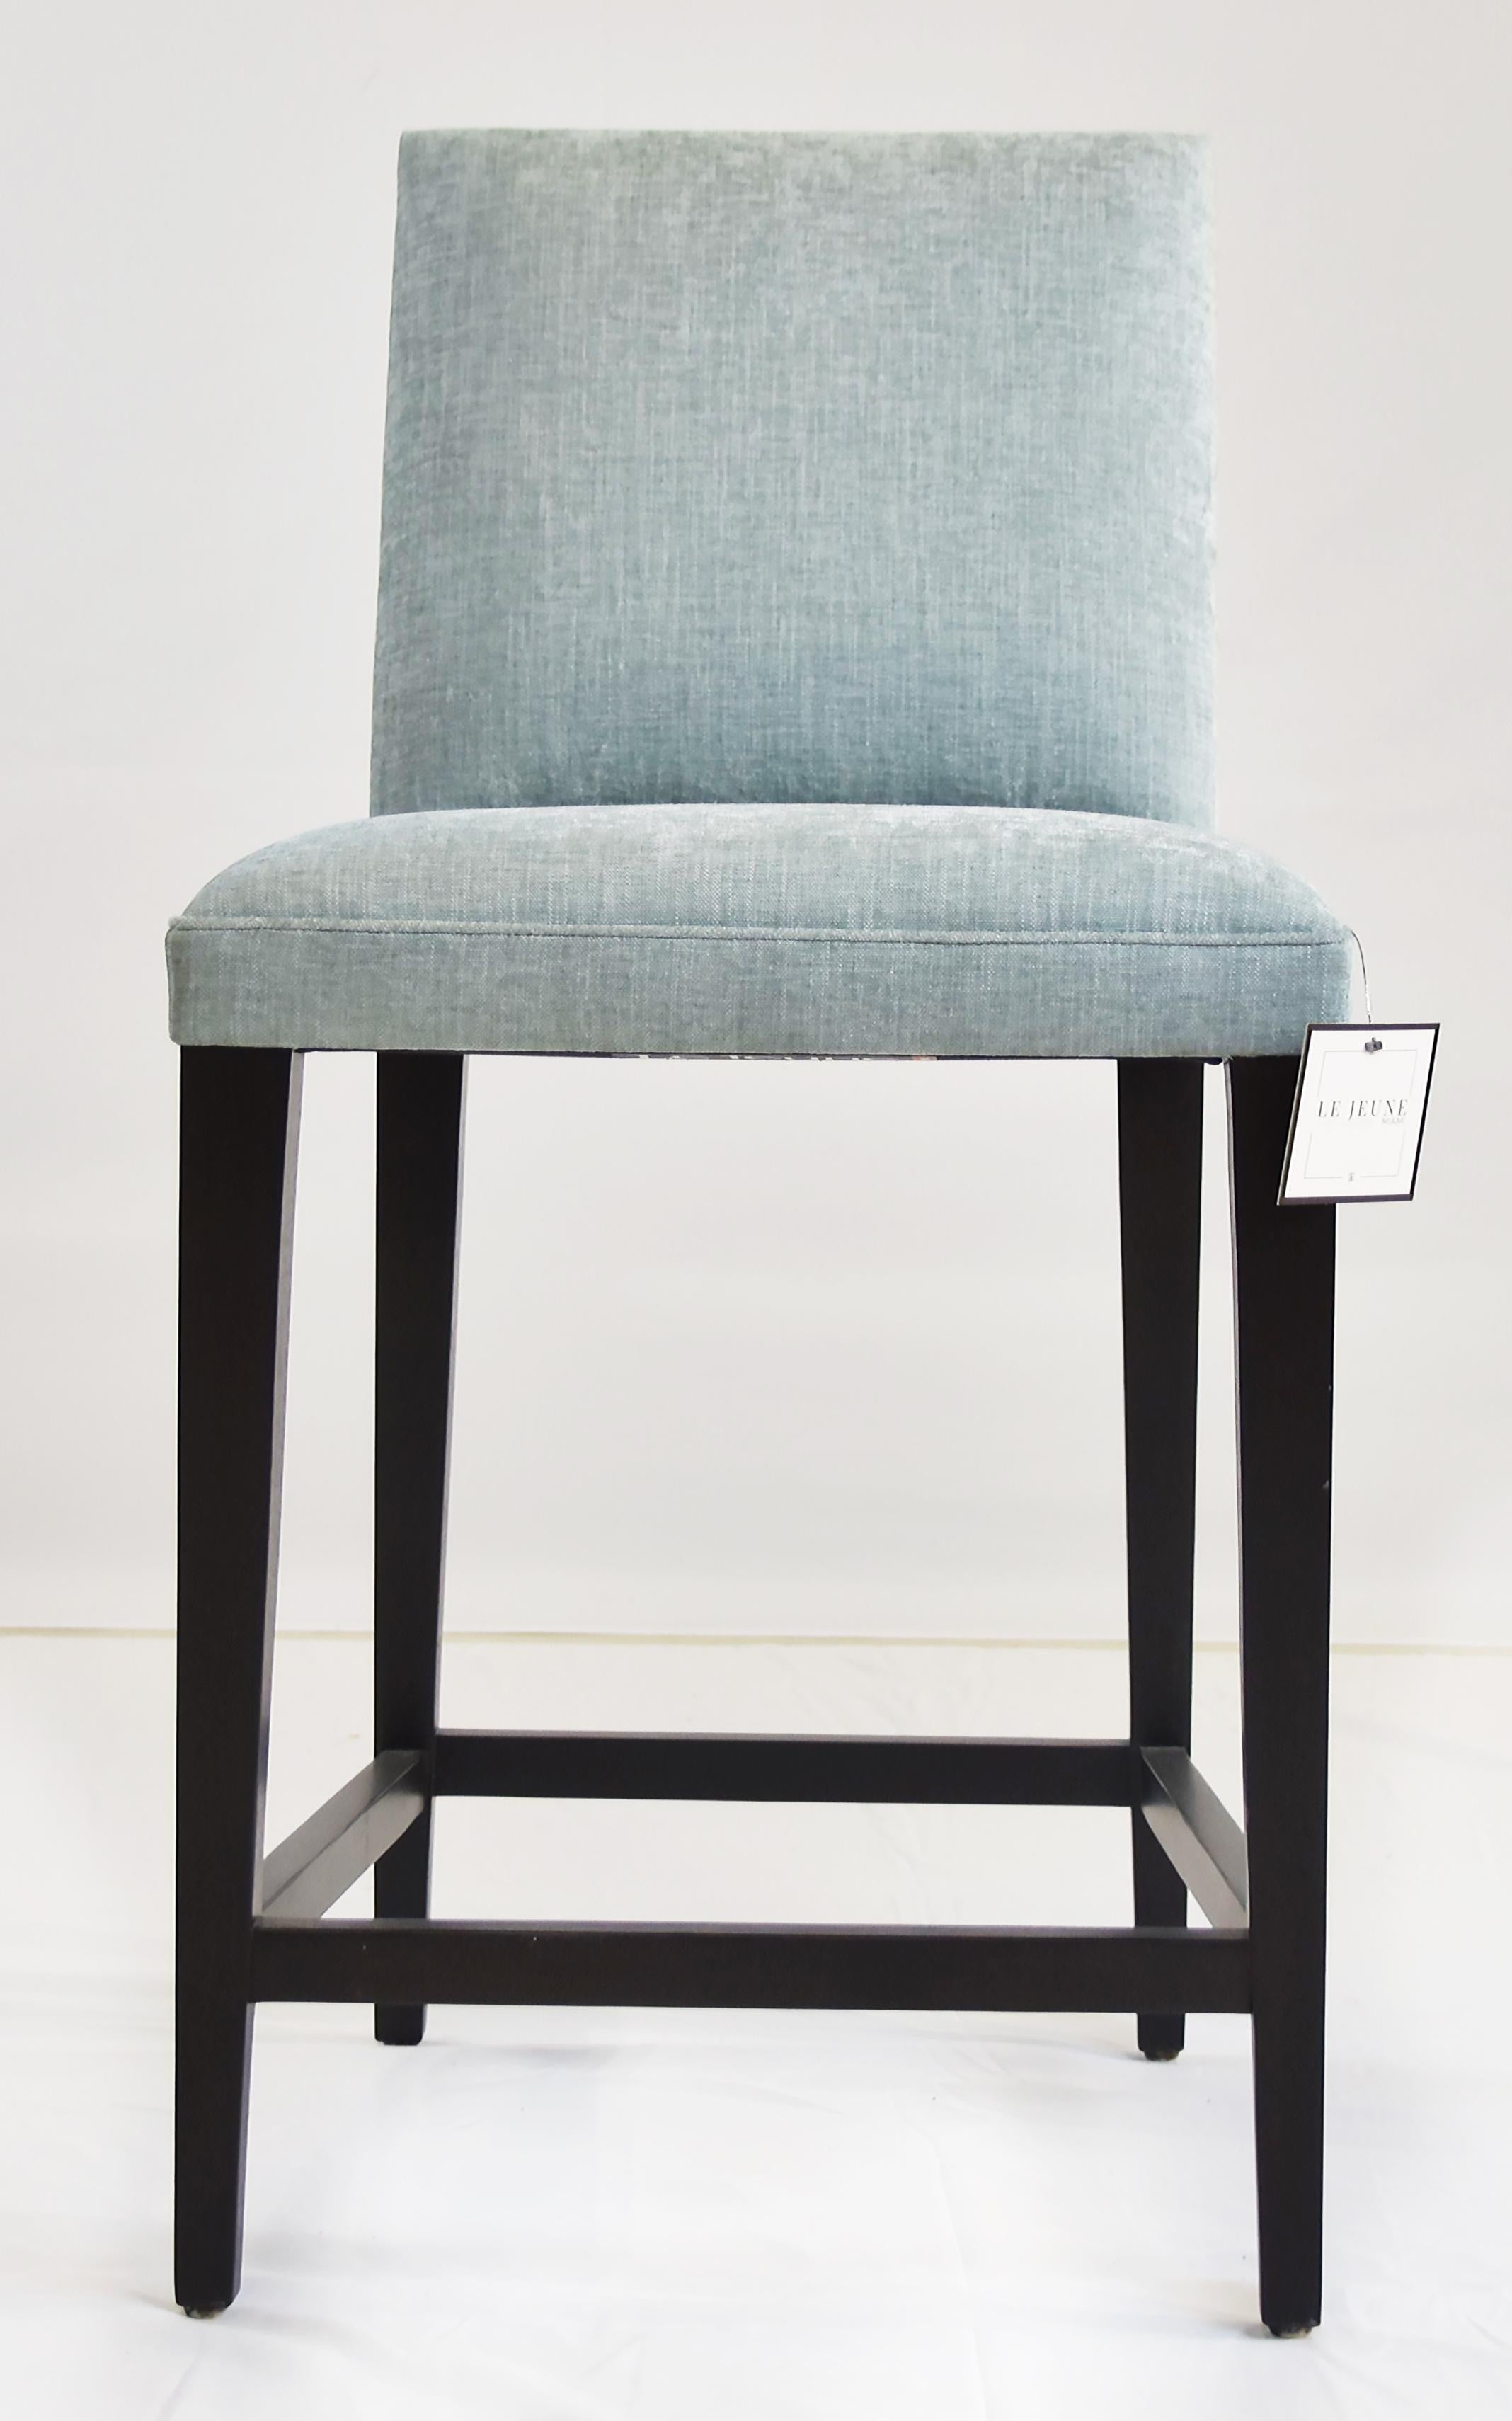    

Le Jeune Upholstery Cutler Counter Stool Floor Model with Wood Footrest

Offered for sale is a counter-height Cutler bar stool showroom floor sample from Le Jeune Upholstery. The stool has a tight seat and back with exposed Mahogany wood legs